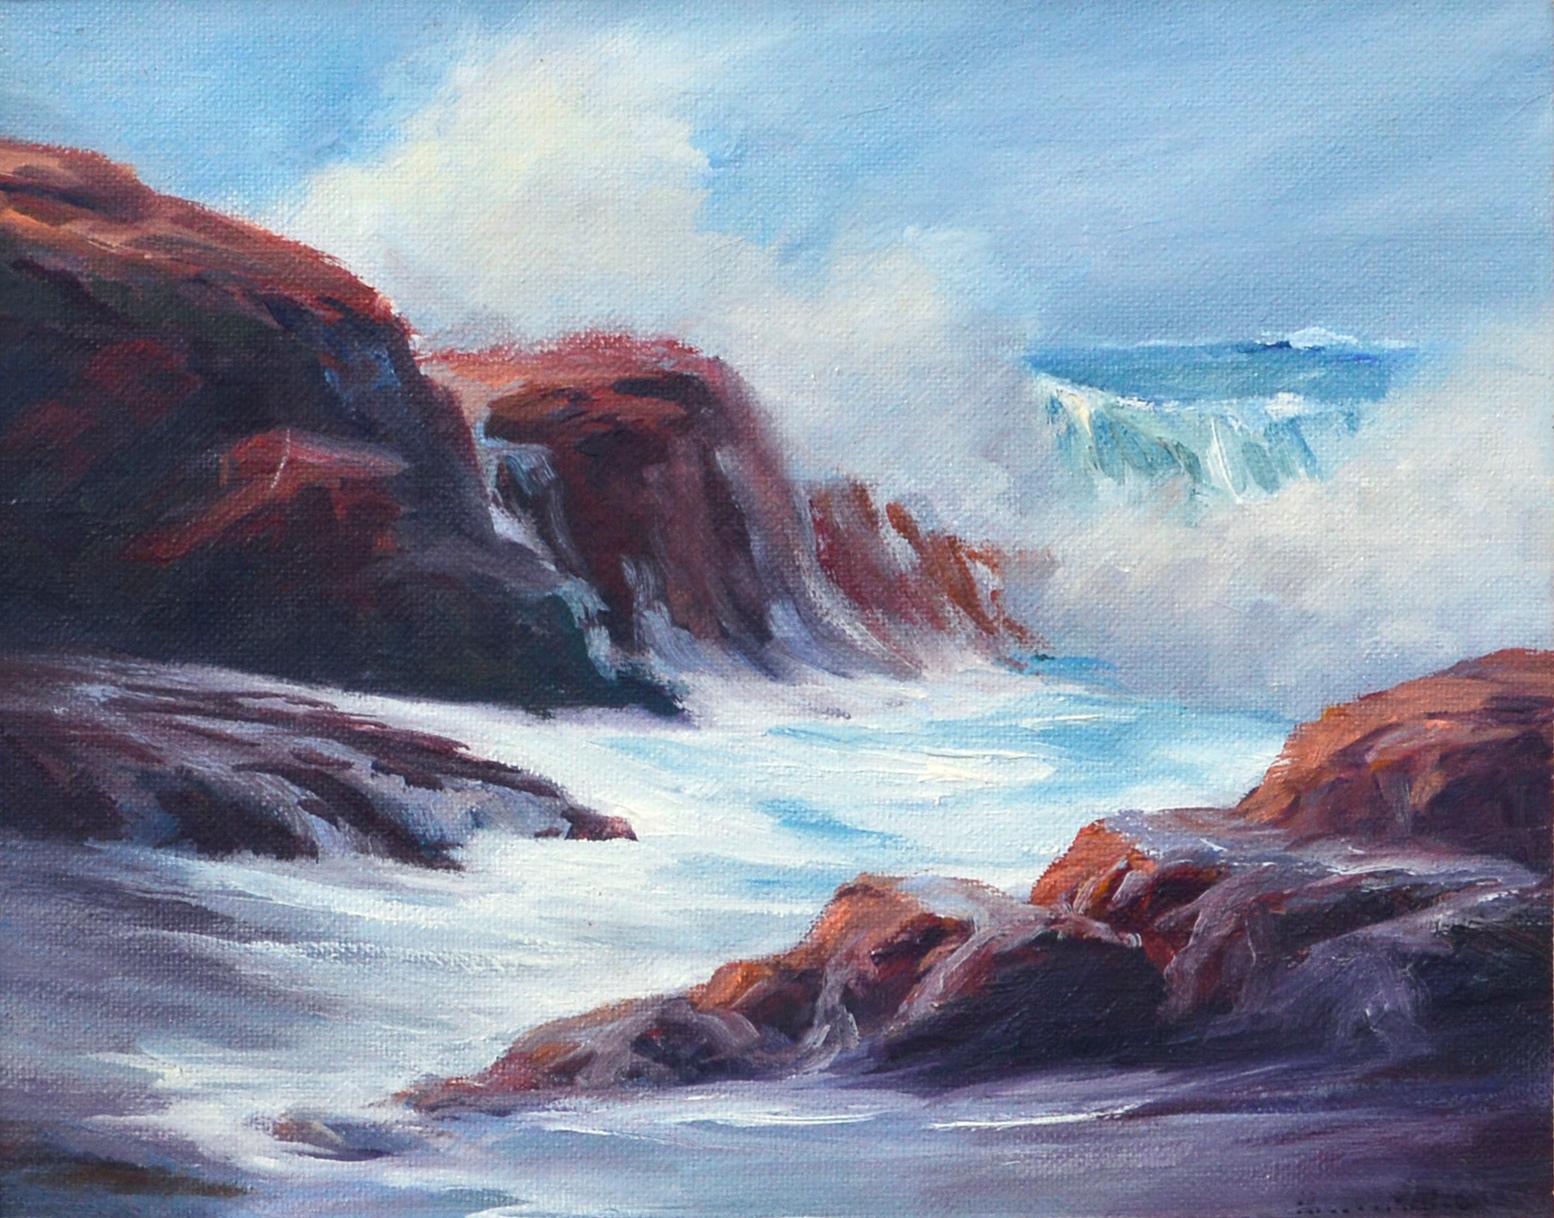 Waves Crashing on the Cliffs Seascape - Painting by Henry Cusimano